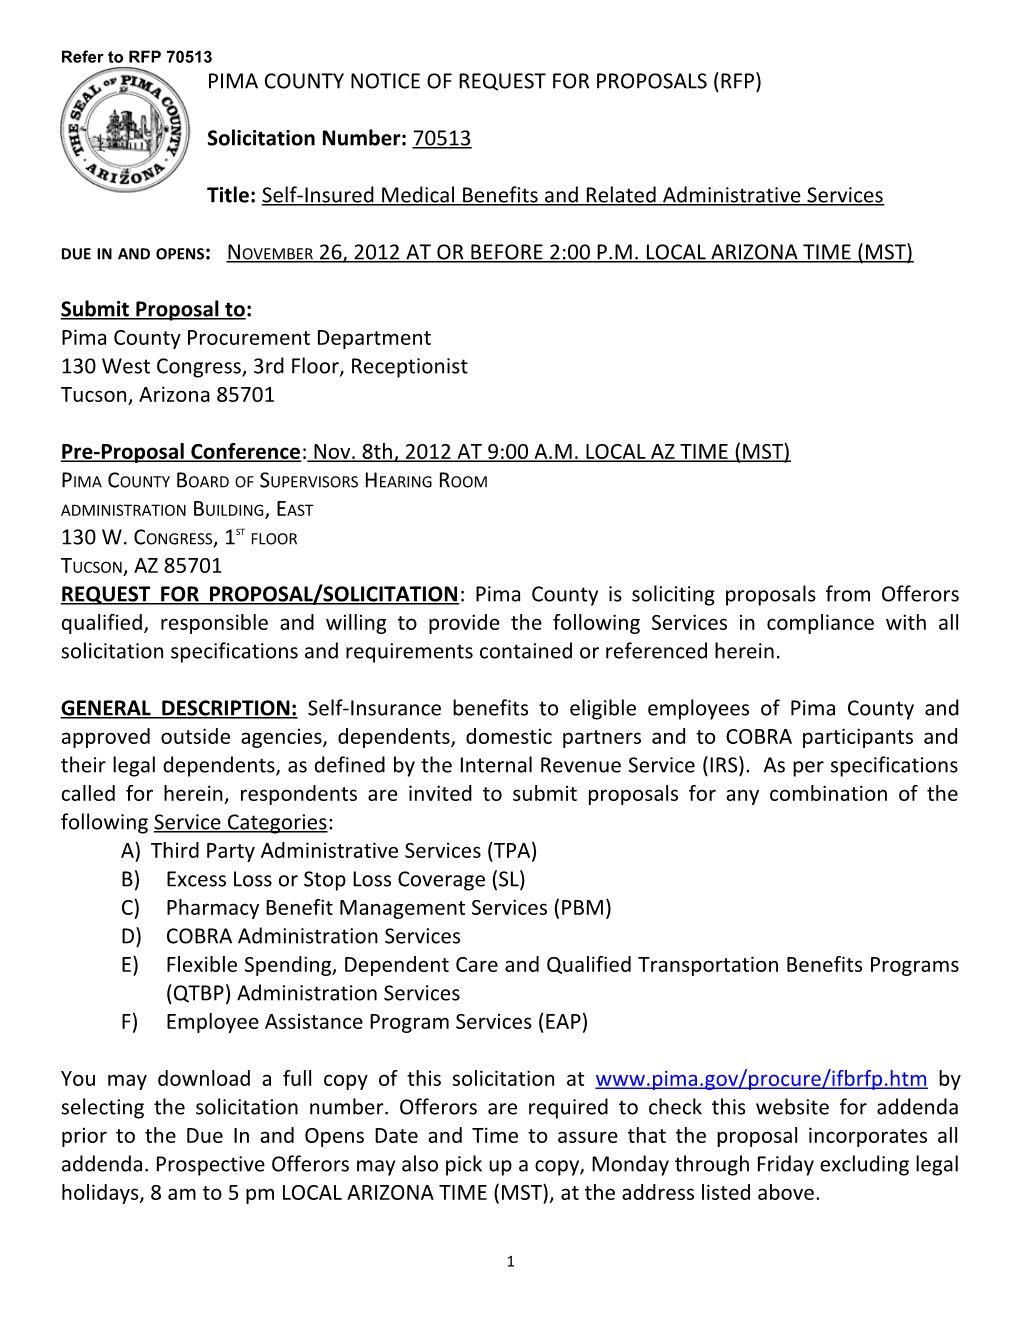 Pima County Notice of Request for Proposals (Rfp)